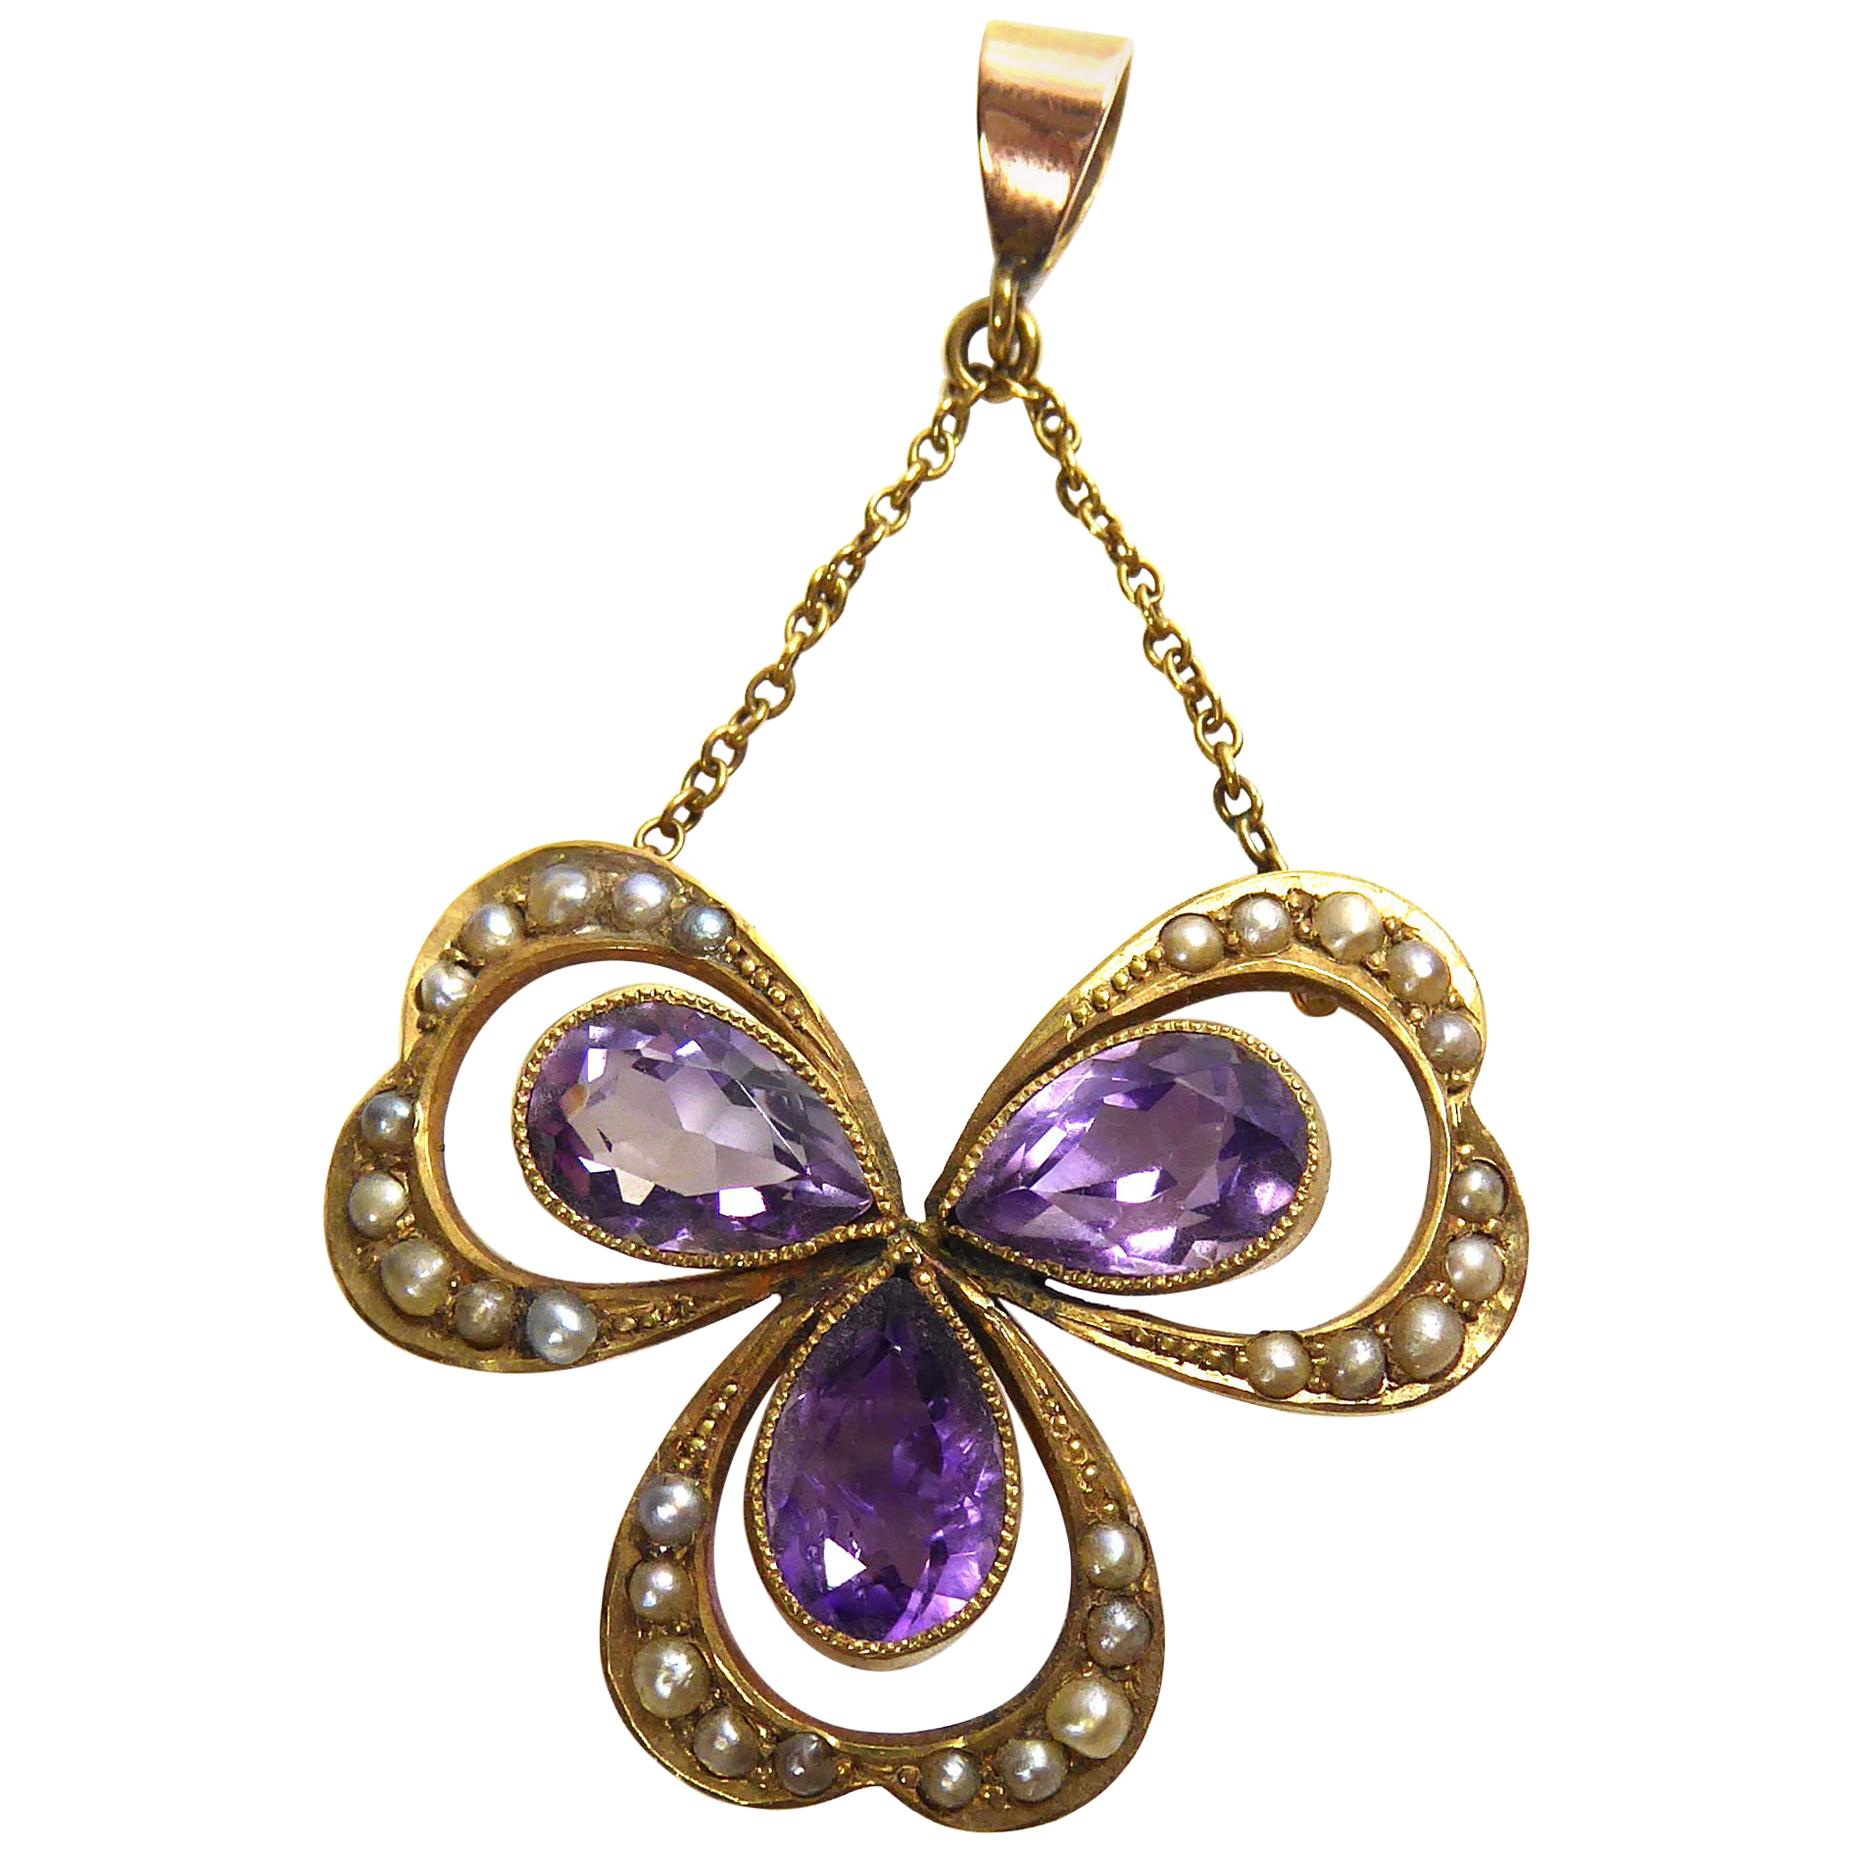 Edwardian Seed Pearl and Amethyst Pendant For Sale